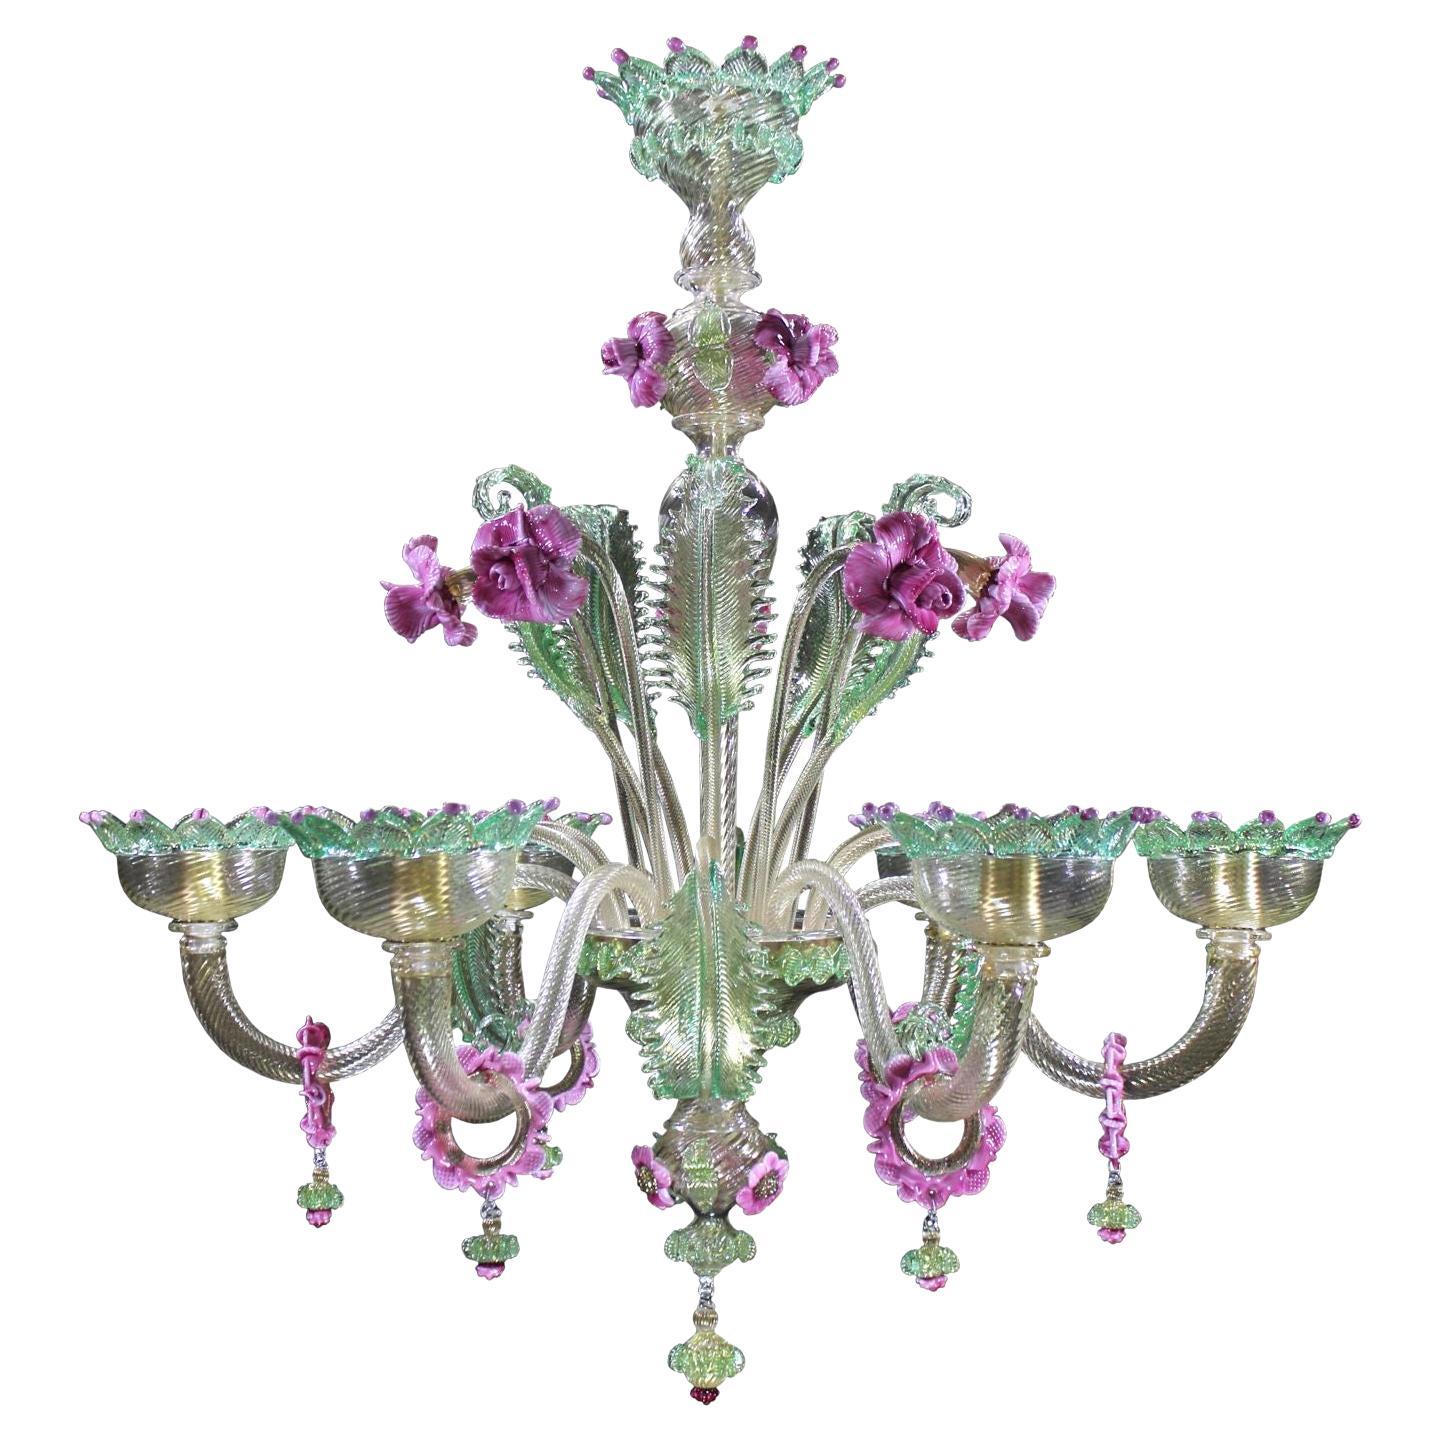 Artistic Chandelier 6 Arms Gold Murano Glass Pink and Gree Details by Multiforme